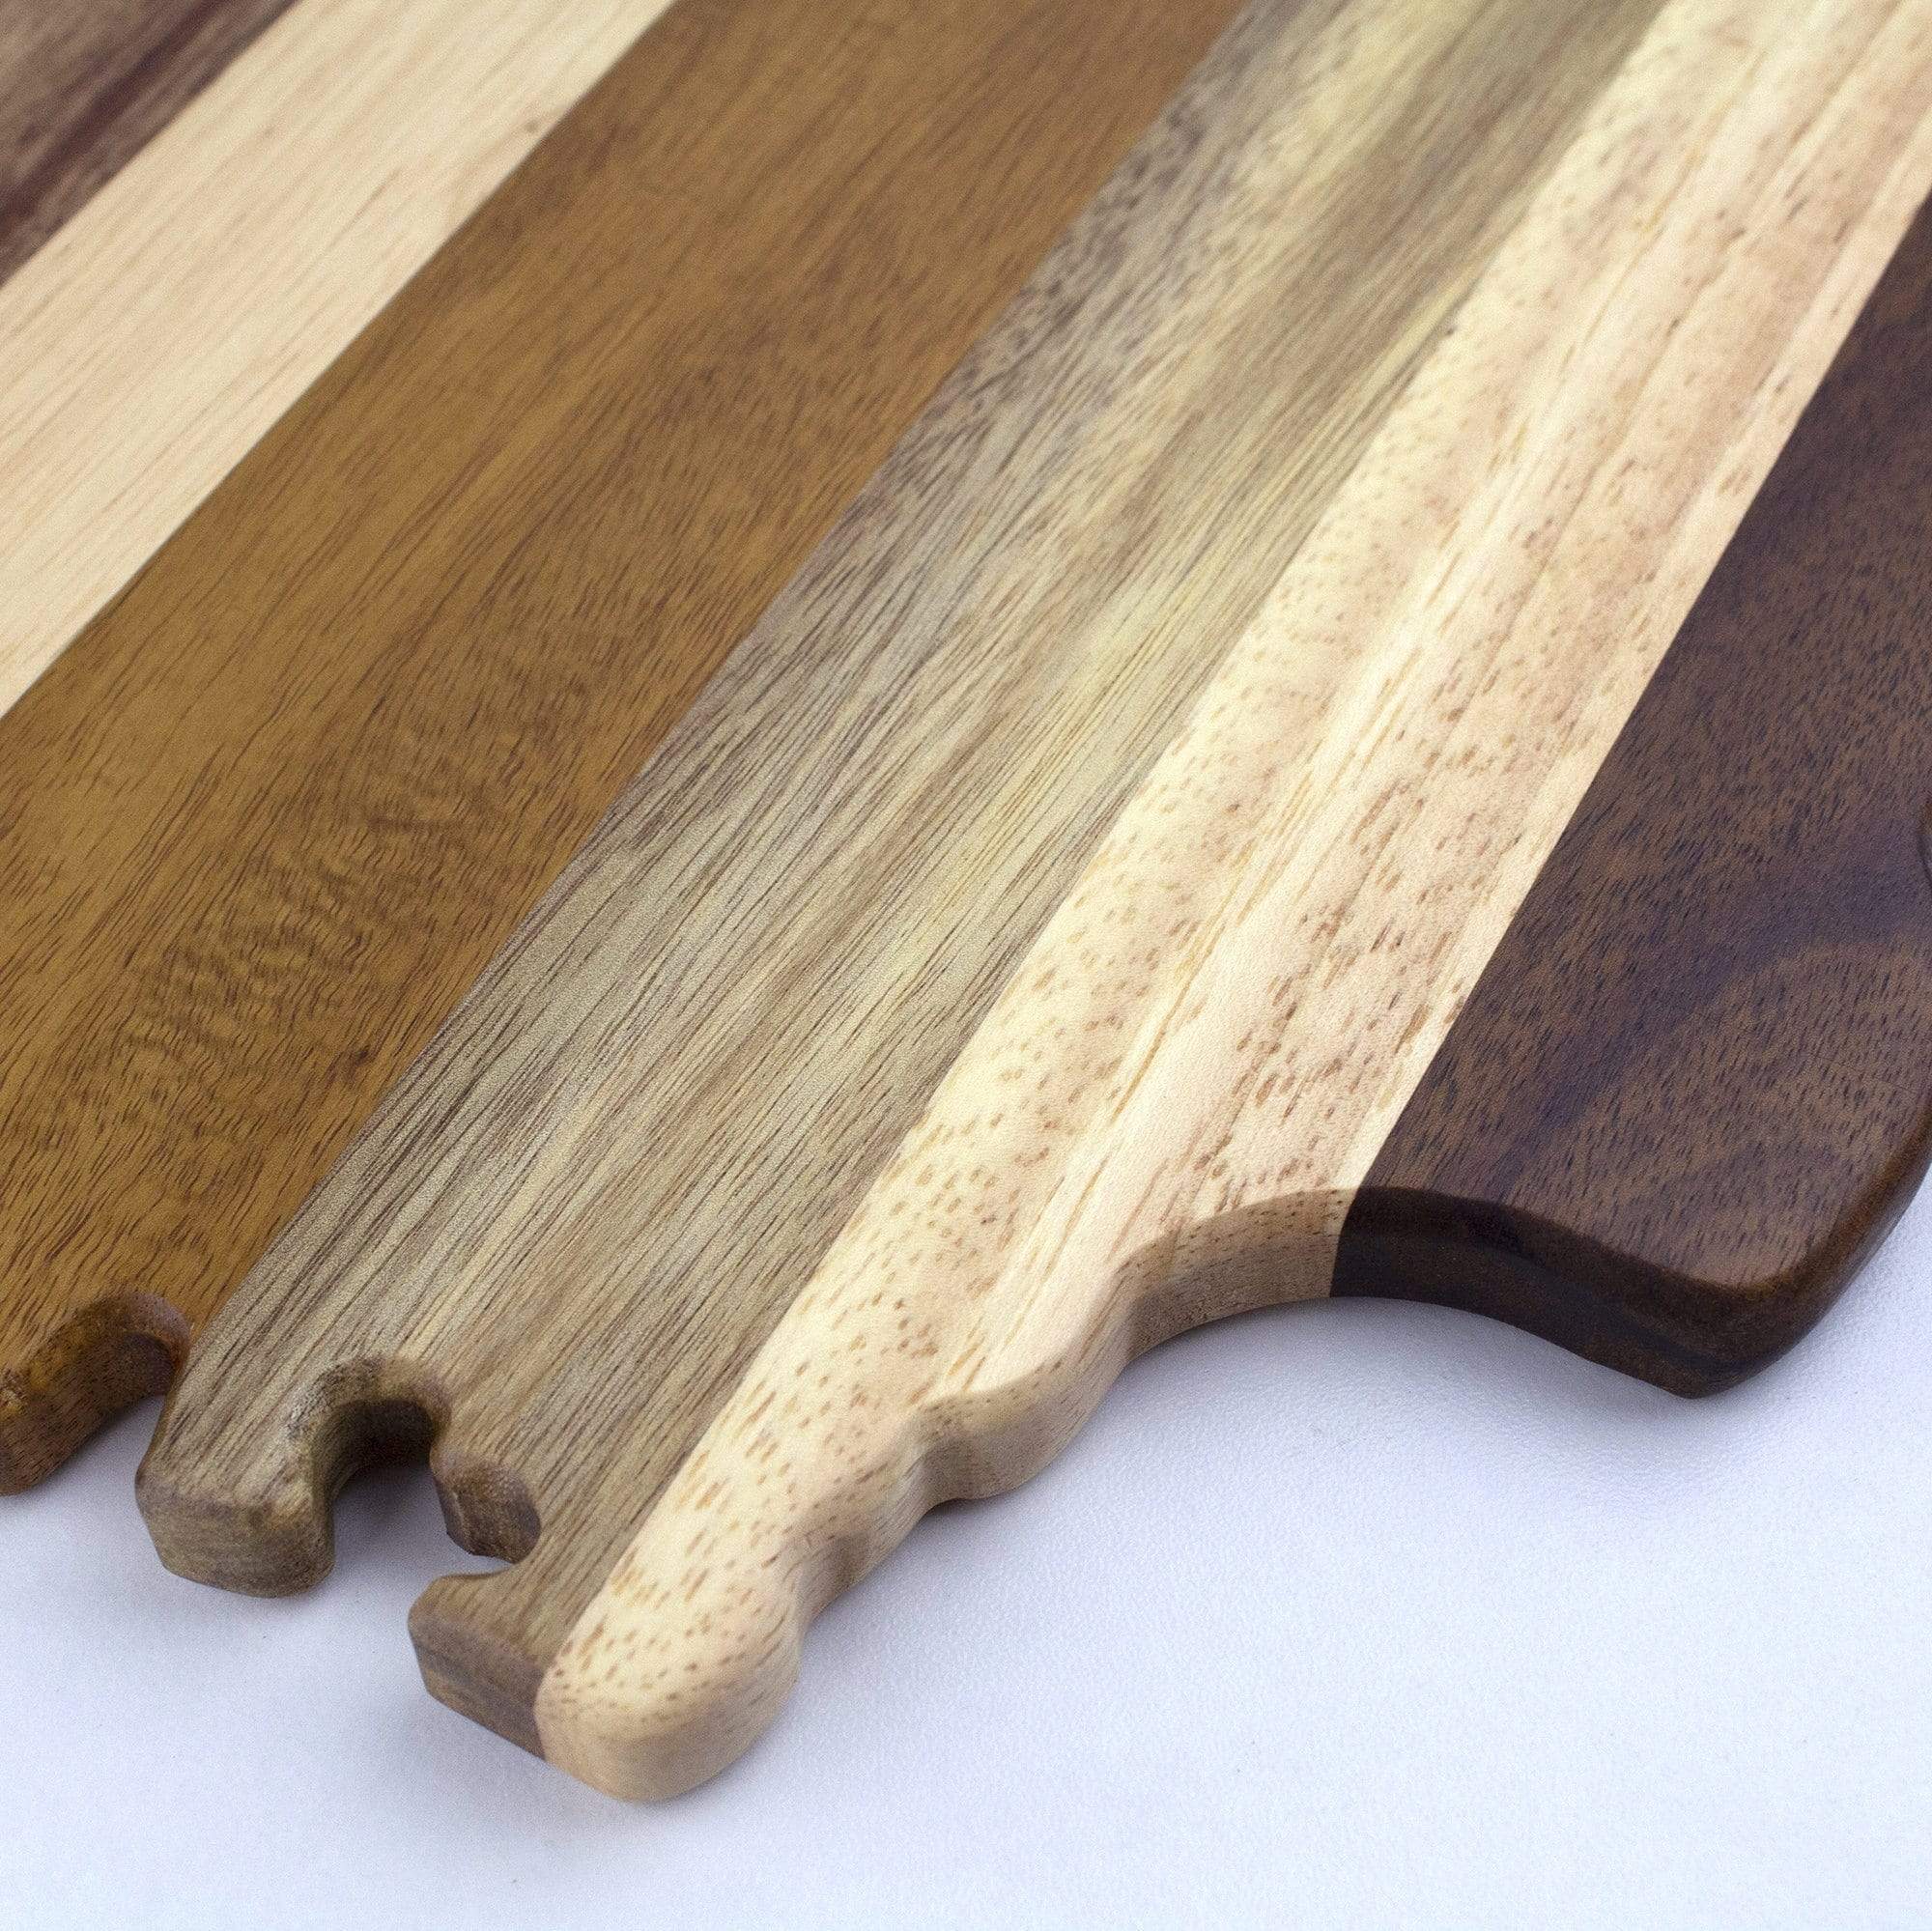 https://totallybamboo.com/cdn/shop/products/rock-branchr-shiplap-series-washington-state-shaped-wood-serving-and-cutting-board-totally-bamboo-161148.jpg?v=1627837024